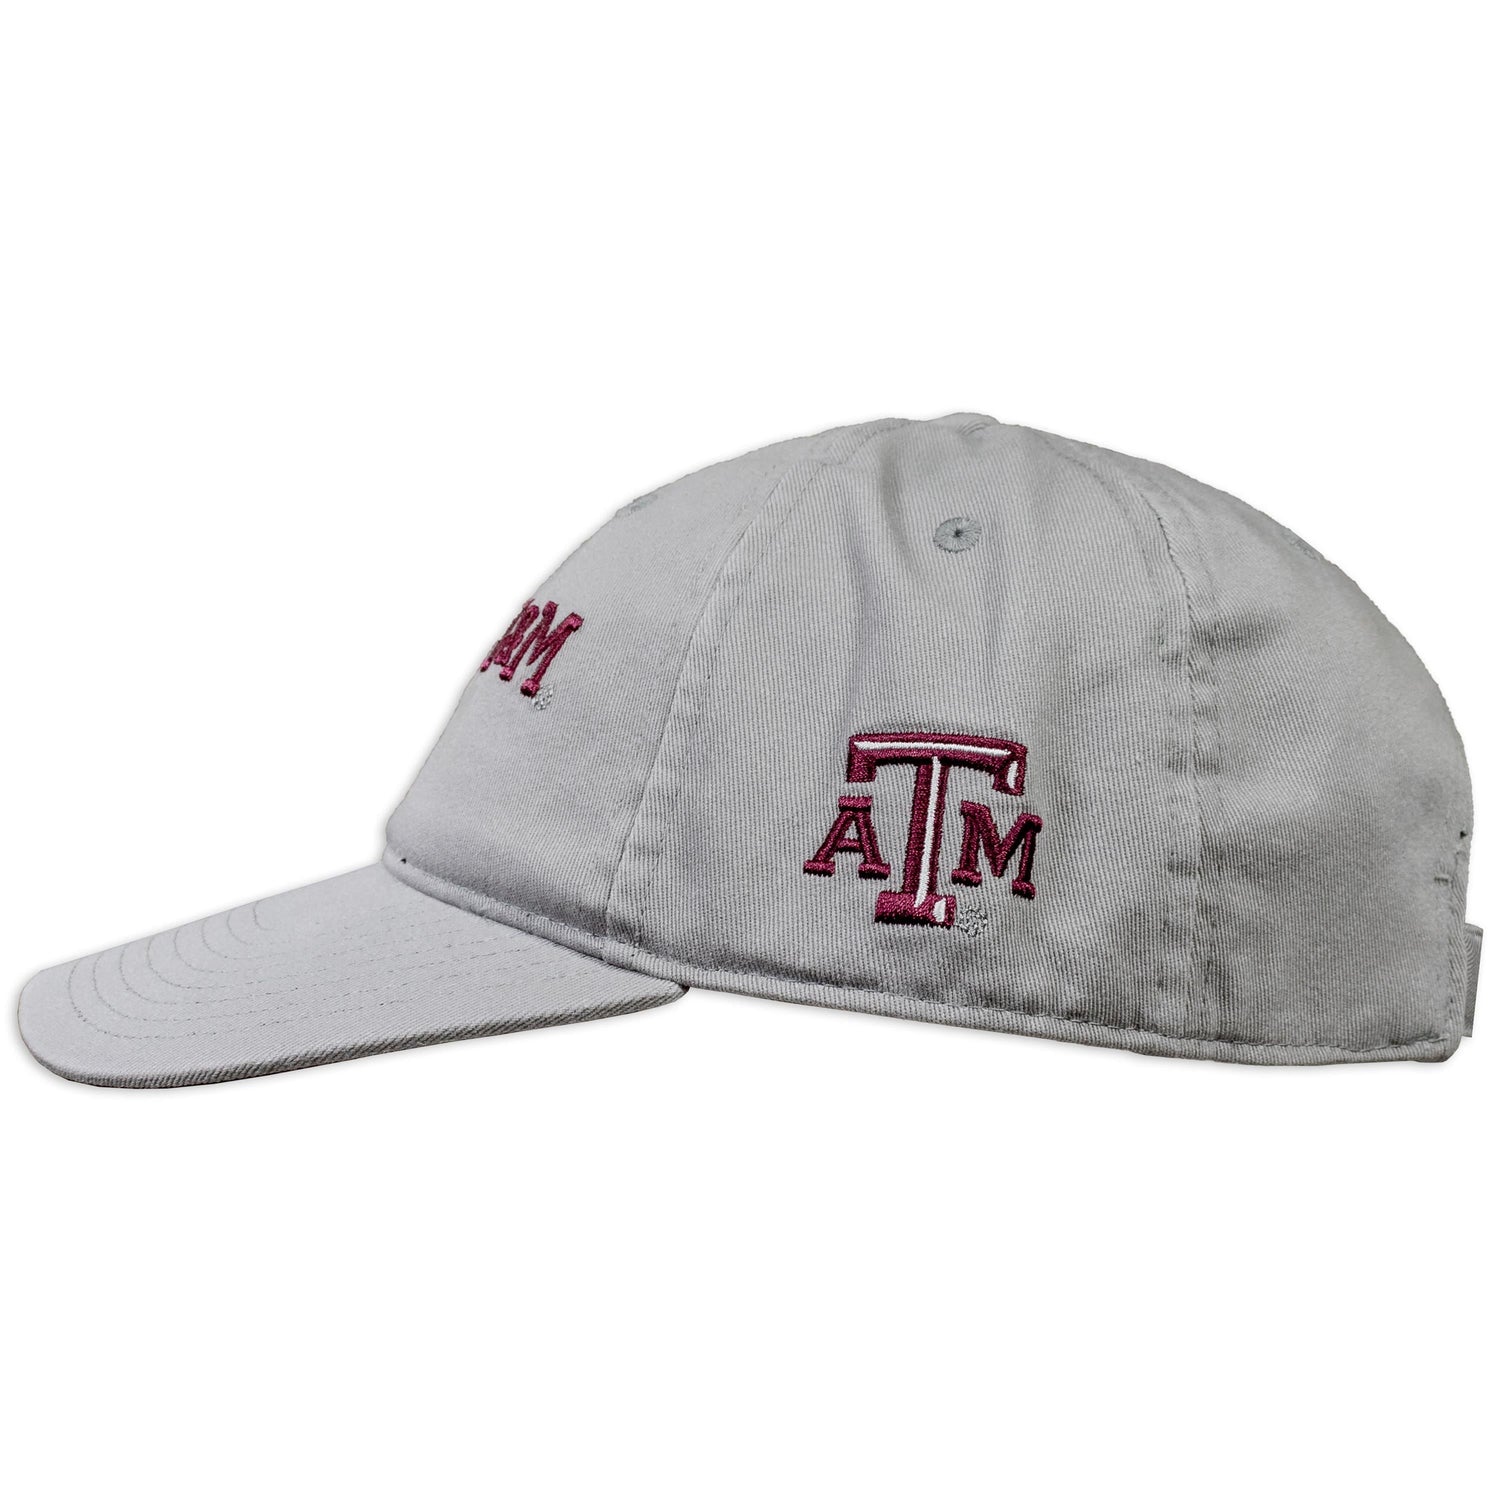 Texas A&M Adidas Bos Cotton Slouch Adjustable Hat